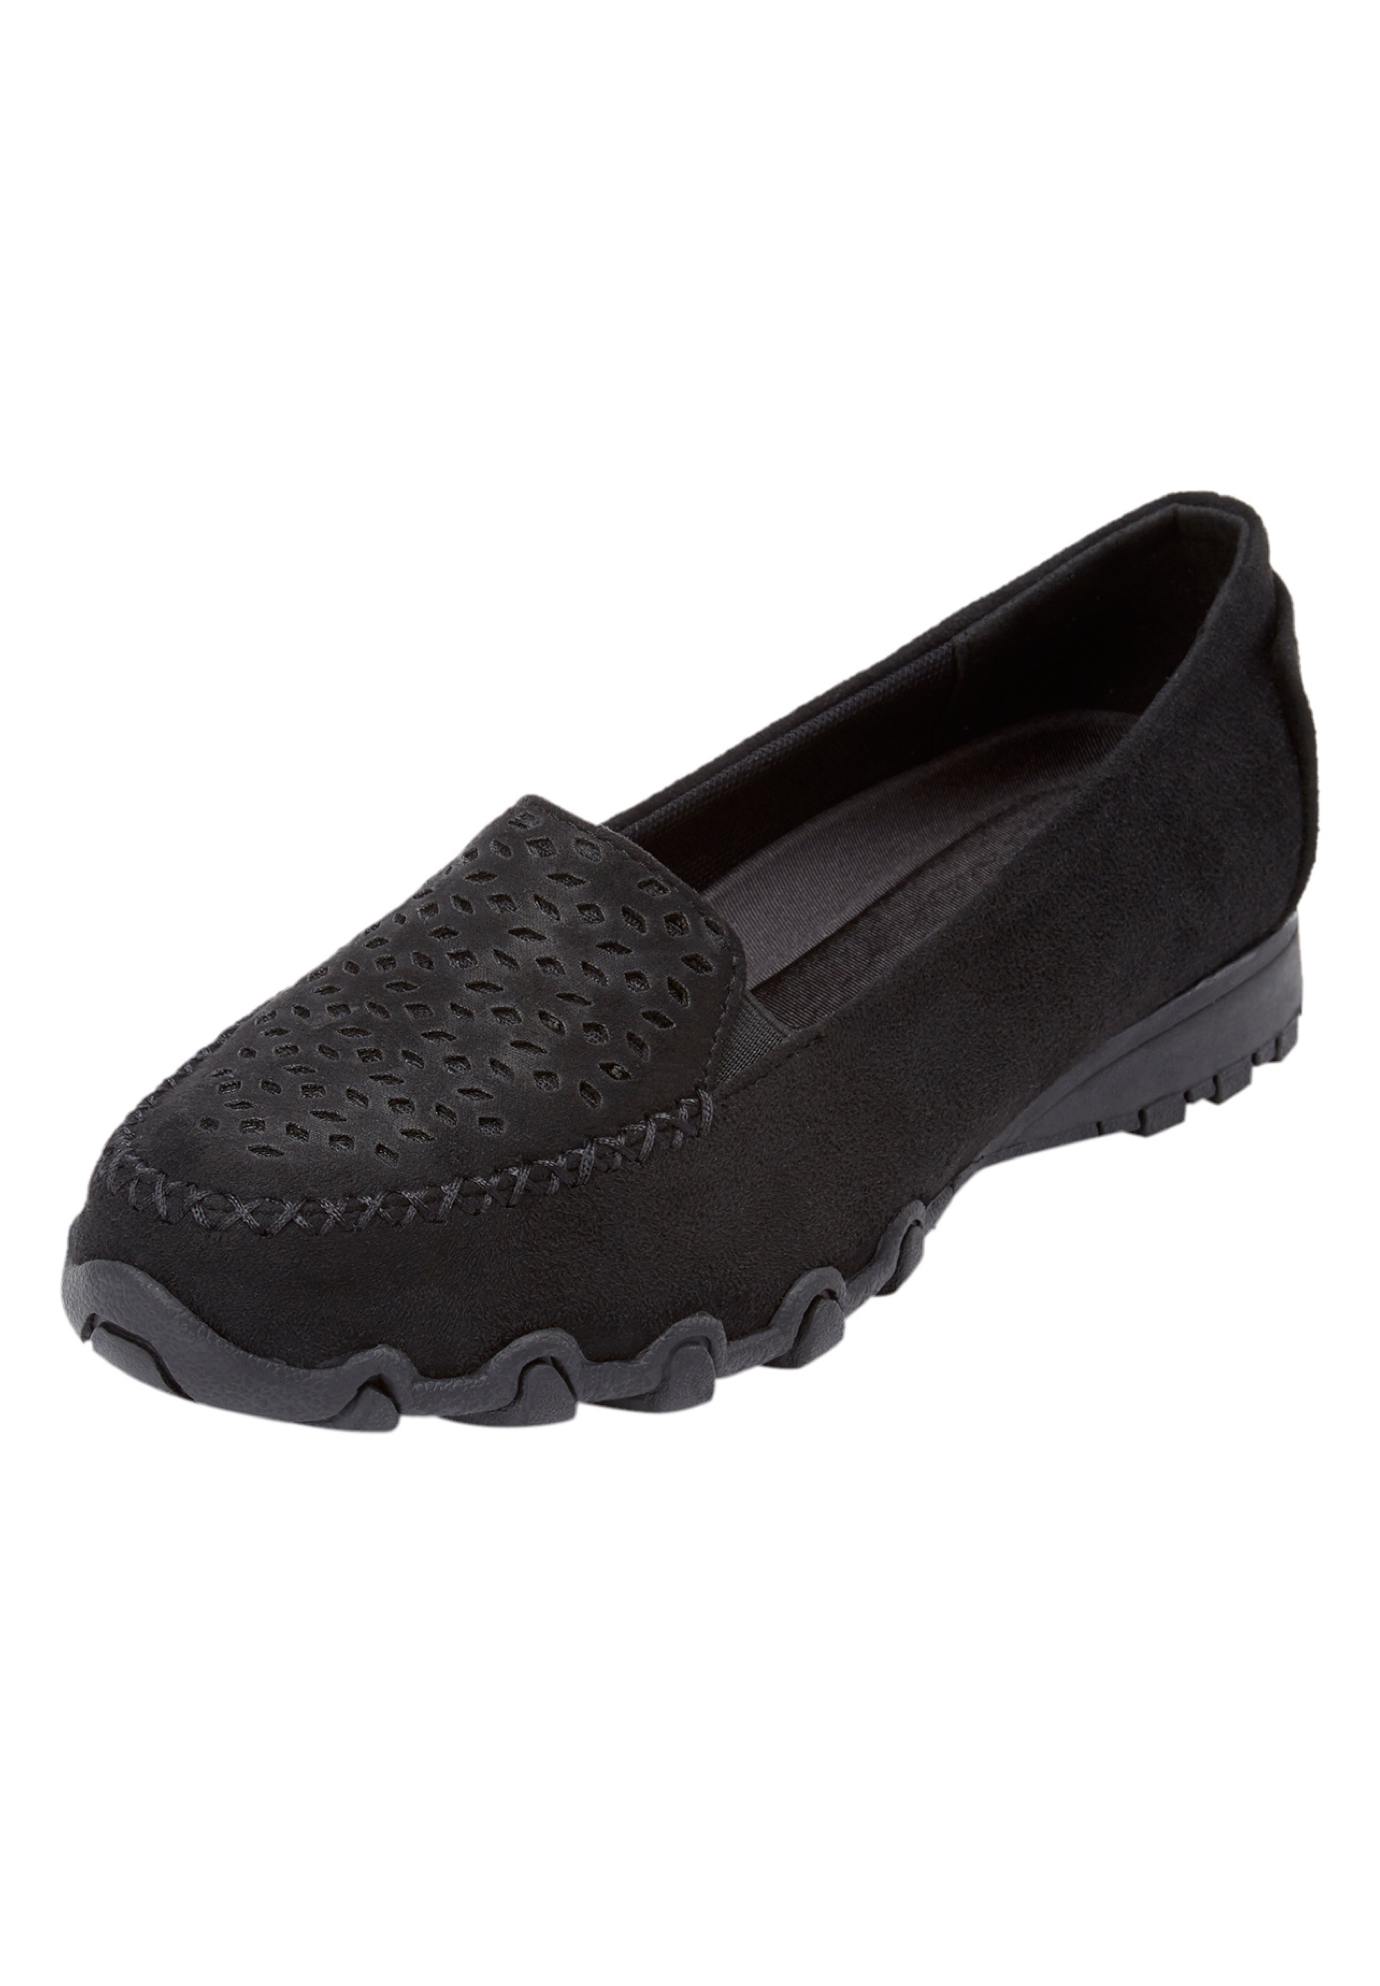 Comfortview Women's Wide Width The Jancis Slip On Flat Shoes - image 1 of 7